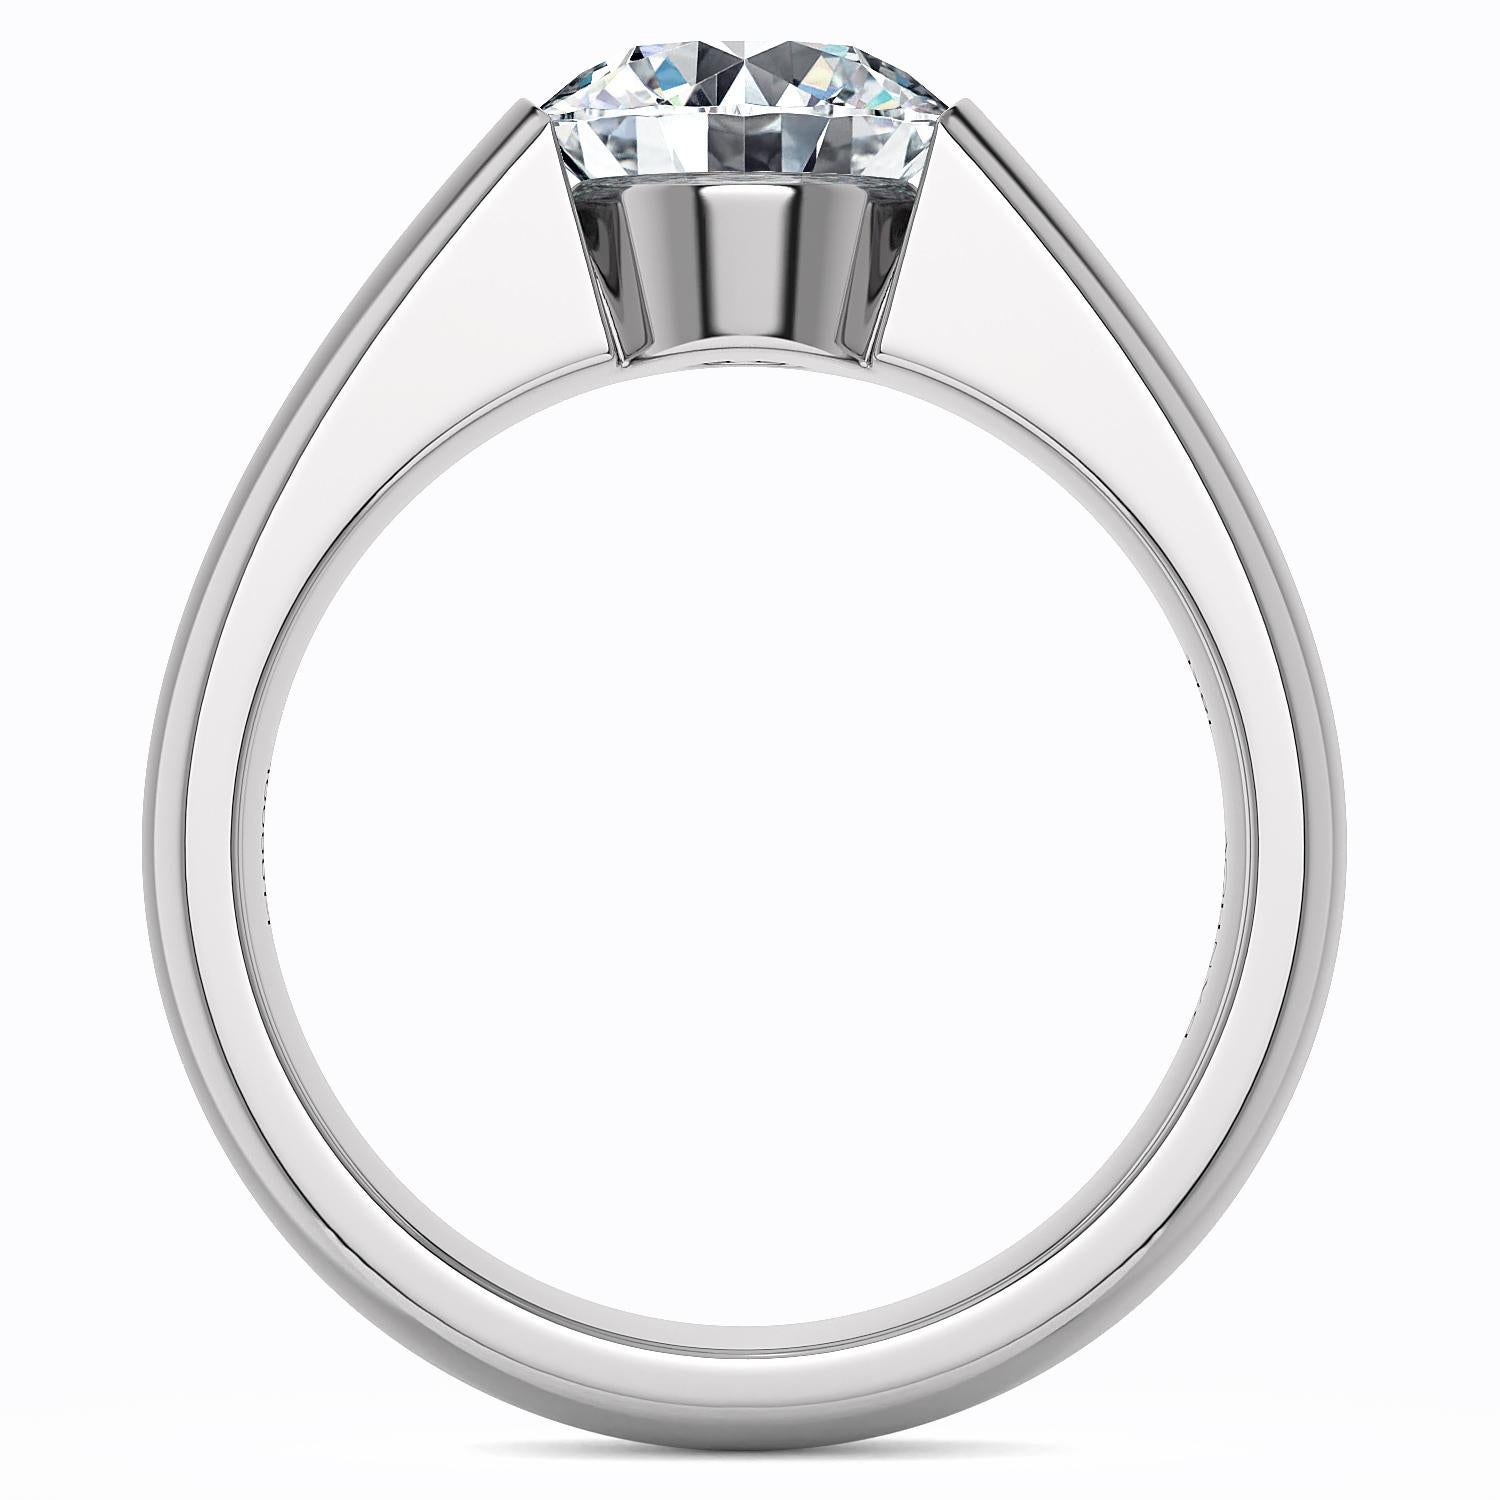 For Sale:  Norem de Danhov tension style engagement ring in 14k White Gold with Moissanite  5